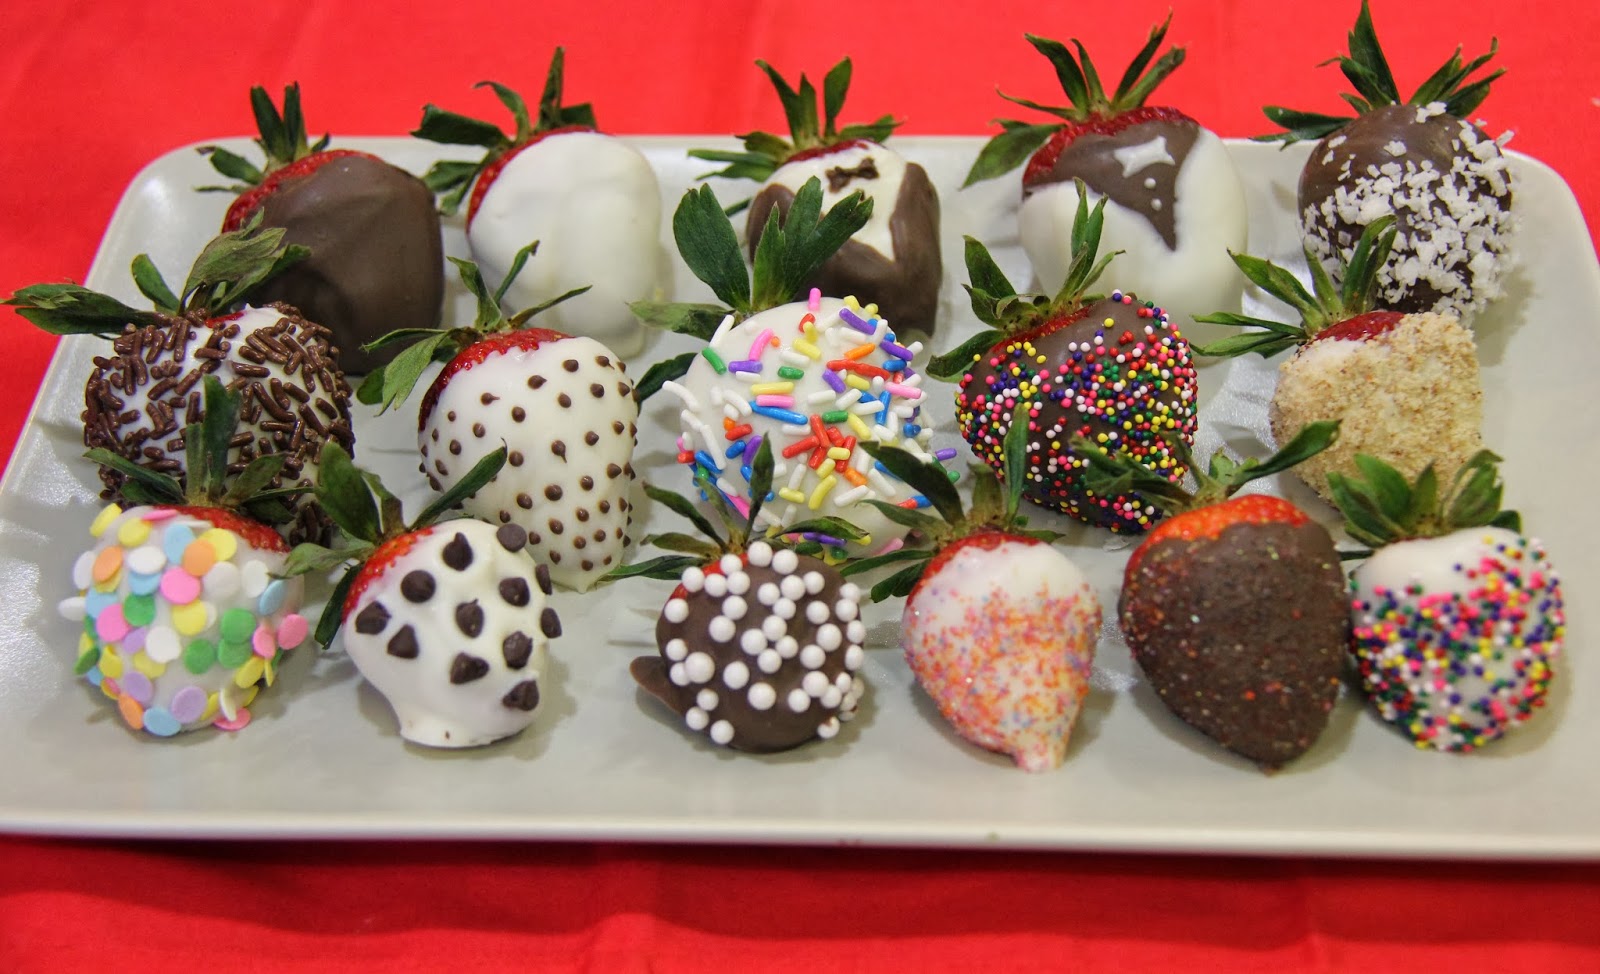 Yummilicioussss Chocolate Covered Strawberries,Ogre Designers Edition